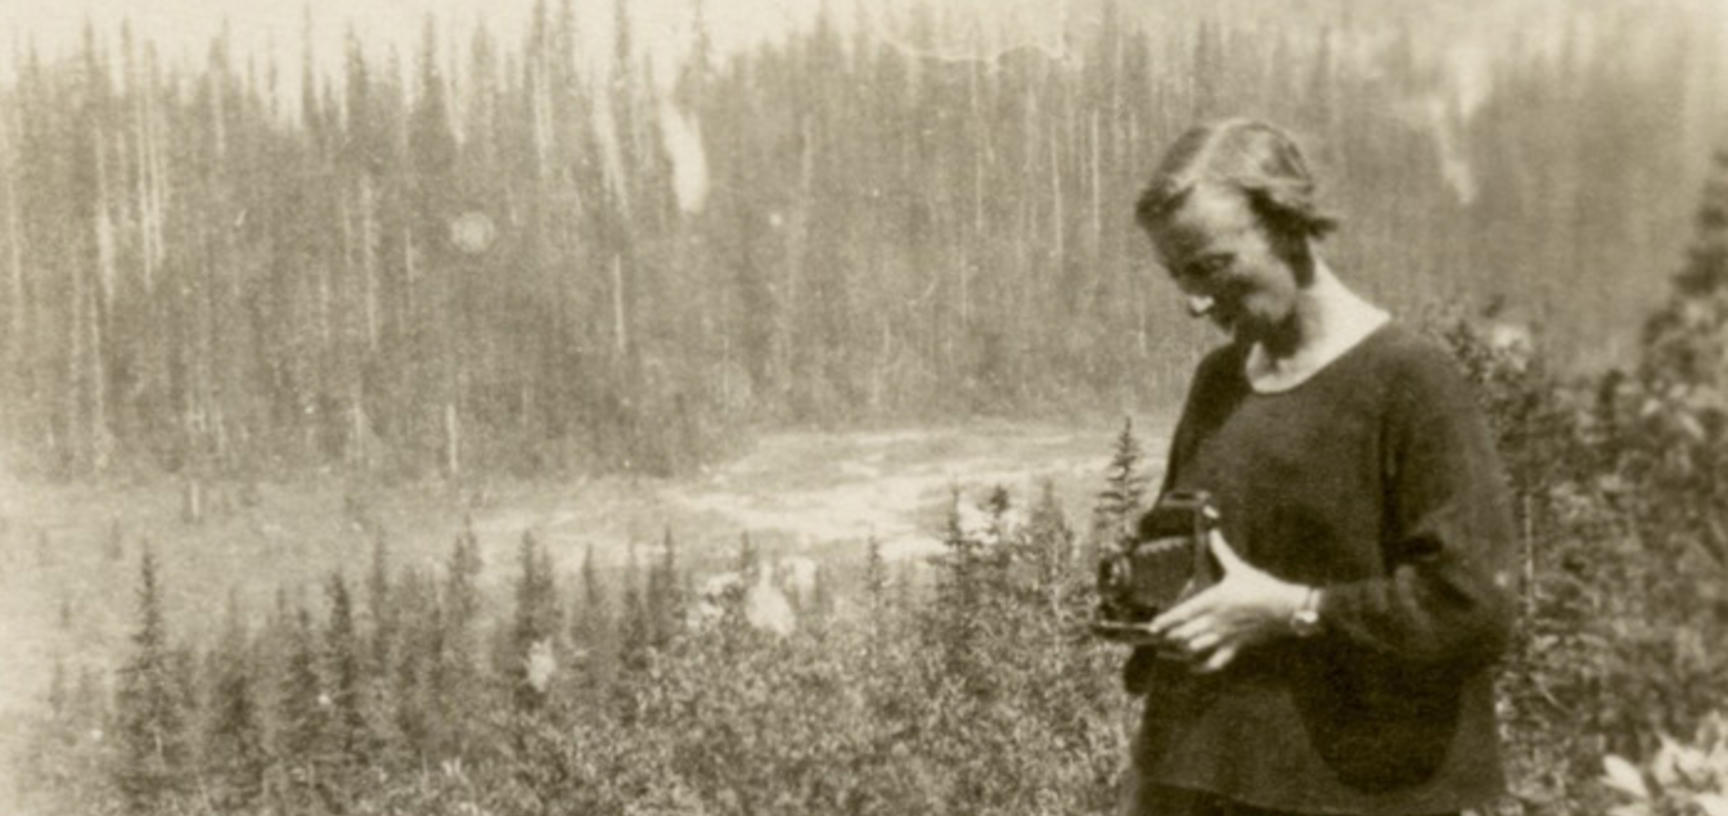 Beatrice Blackwood with her camera during anthropological fieldwork in Yoho Valley.